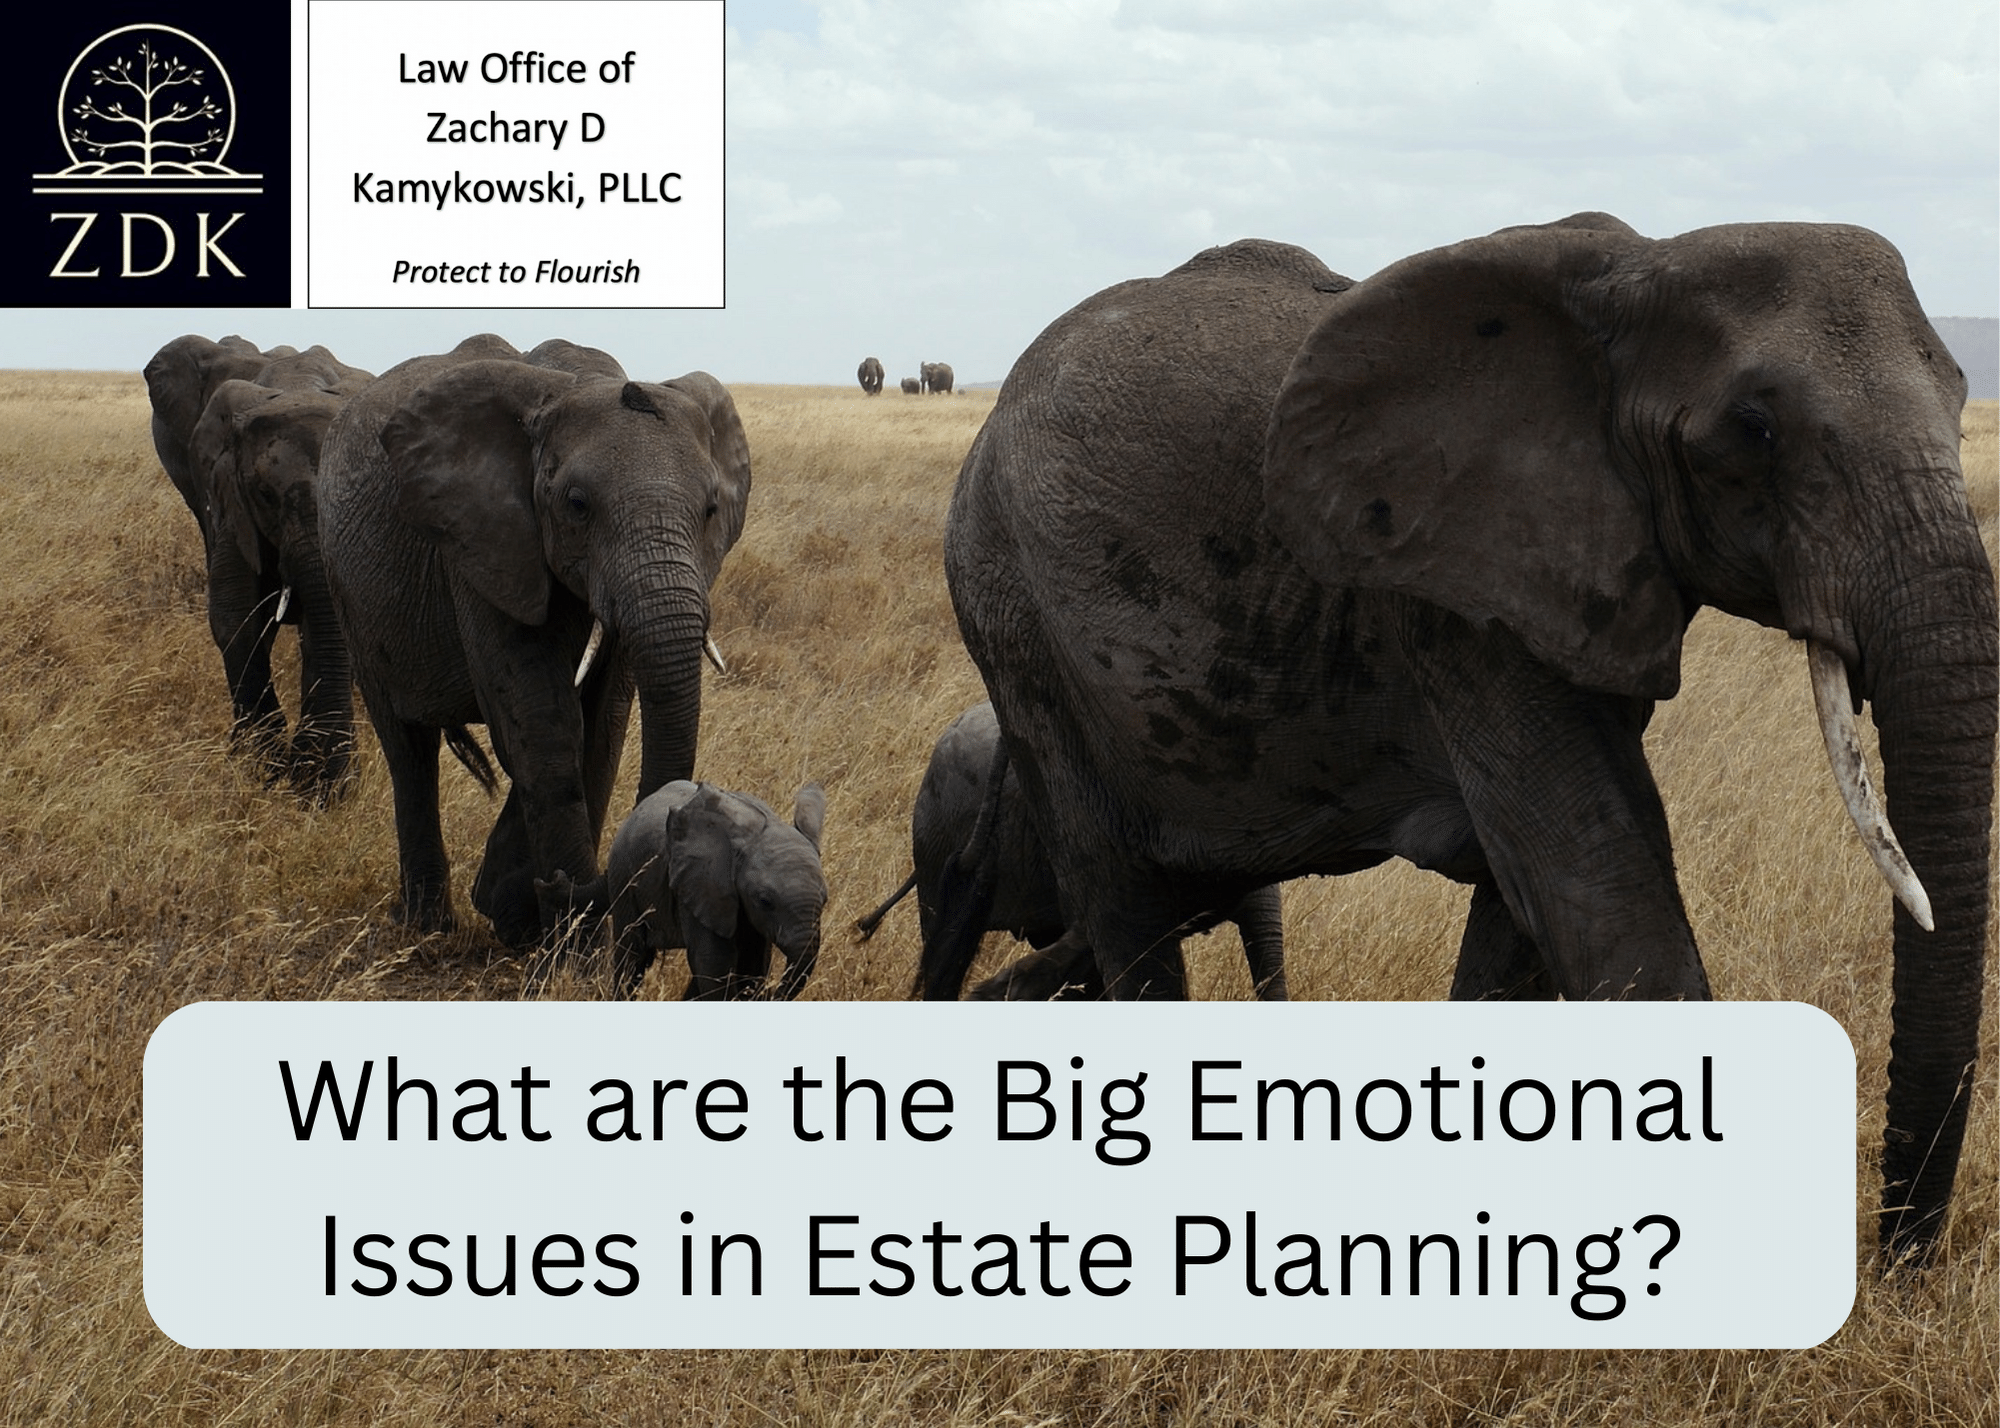 What are the Big Emotional Issues in Estate Planning